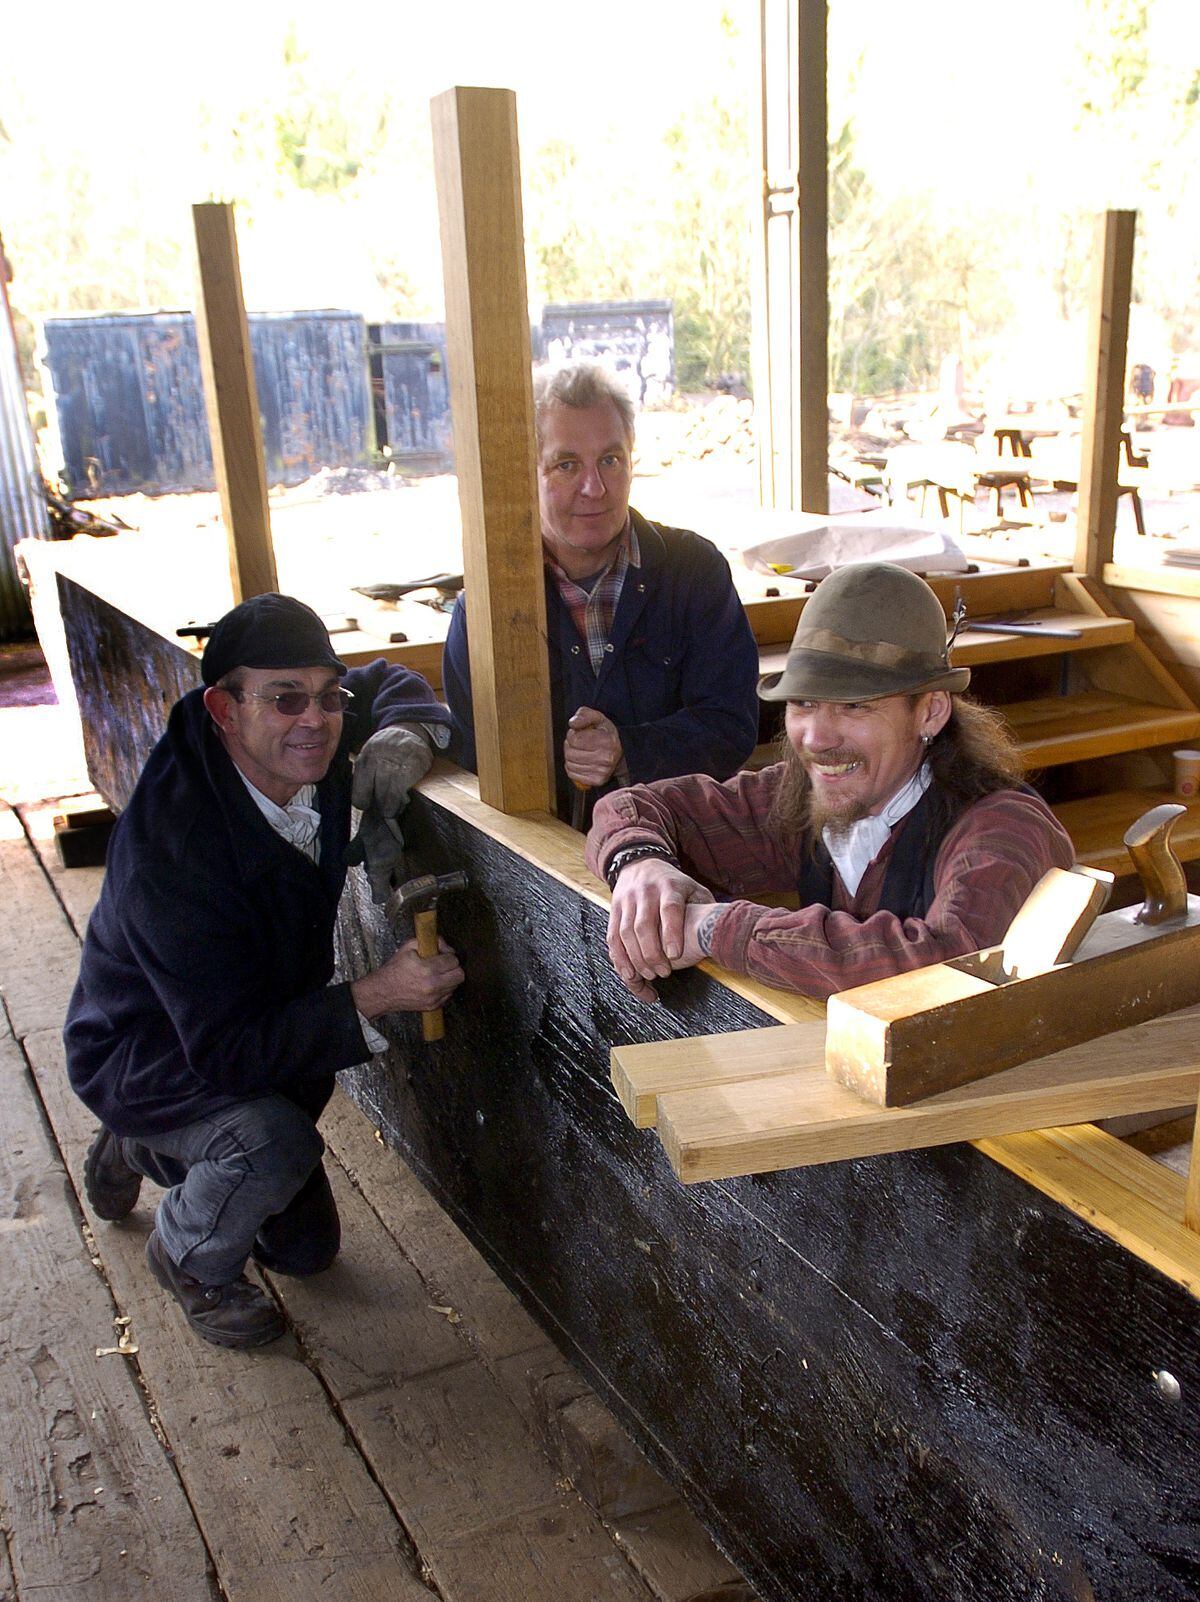 Tom Jones, Peter Stoddad and Mark Deakin-Segal at work on the new Hampton Loade ferry being built at the Blist Hill Museum.